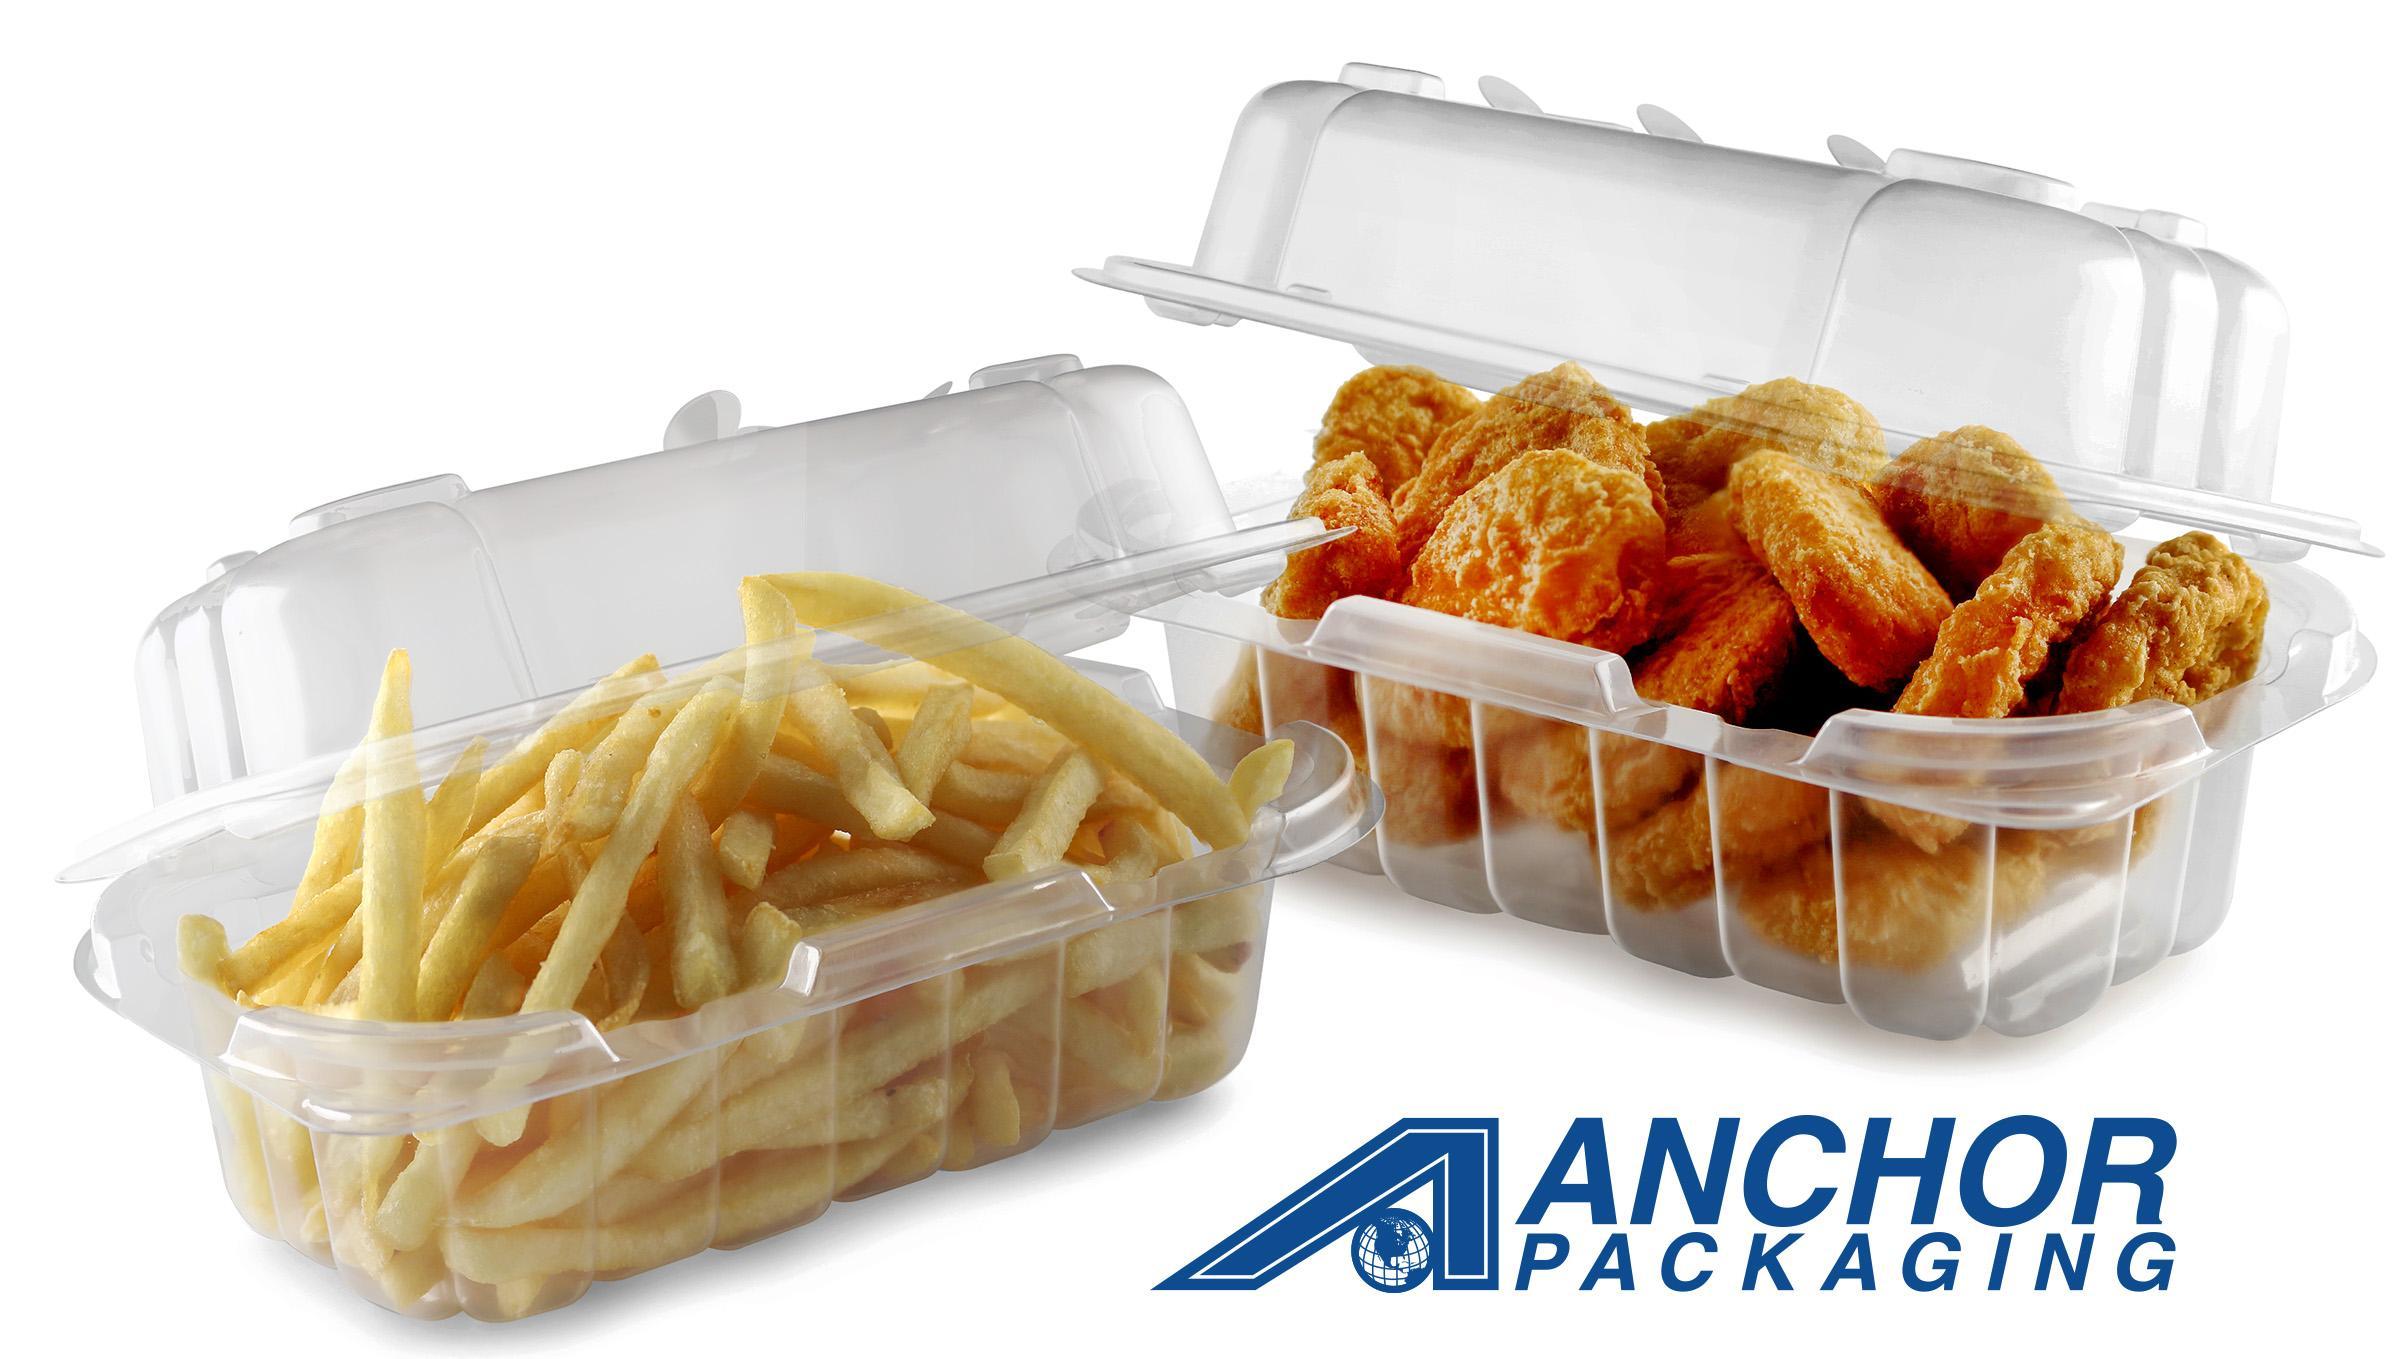 BREAKTHROUGH CONTAINER KEEPS FRIED FOODS HOT & CRISPY - COSTS LESS THAN  PAPER - Anchor Packaging